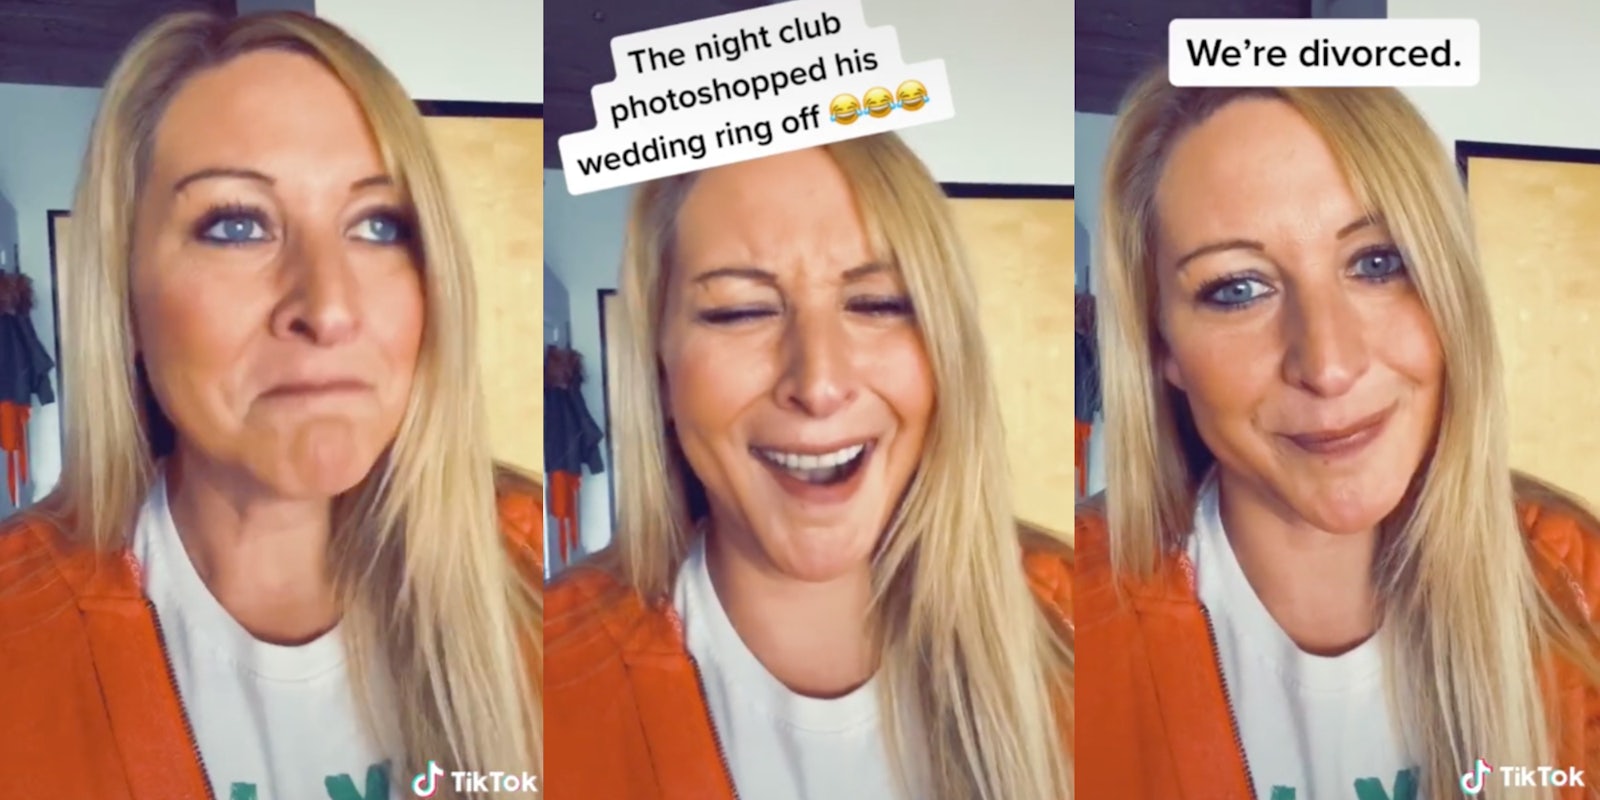 tiktoker shares story of how her husband said a nightclub photoshopped his ring away